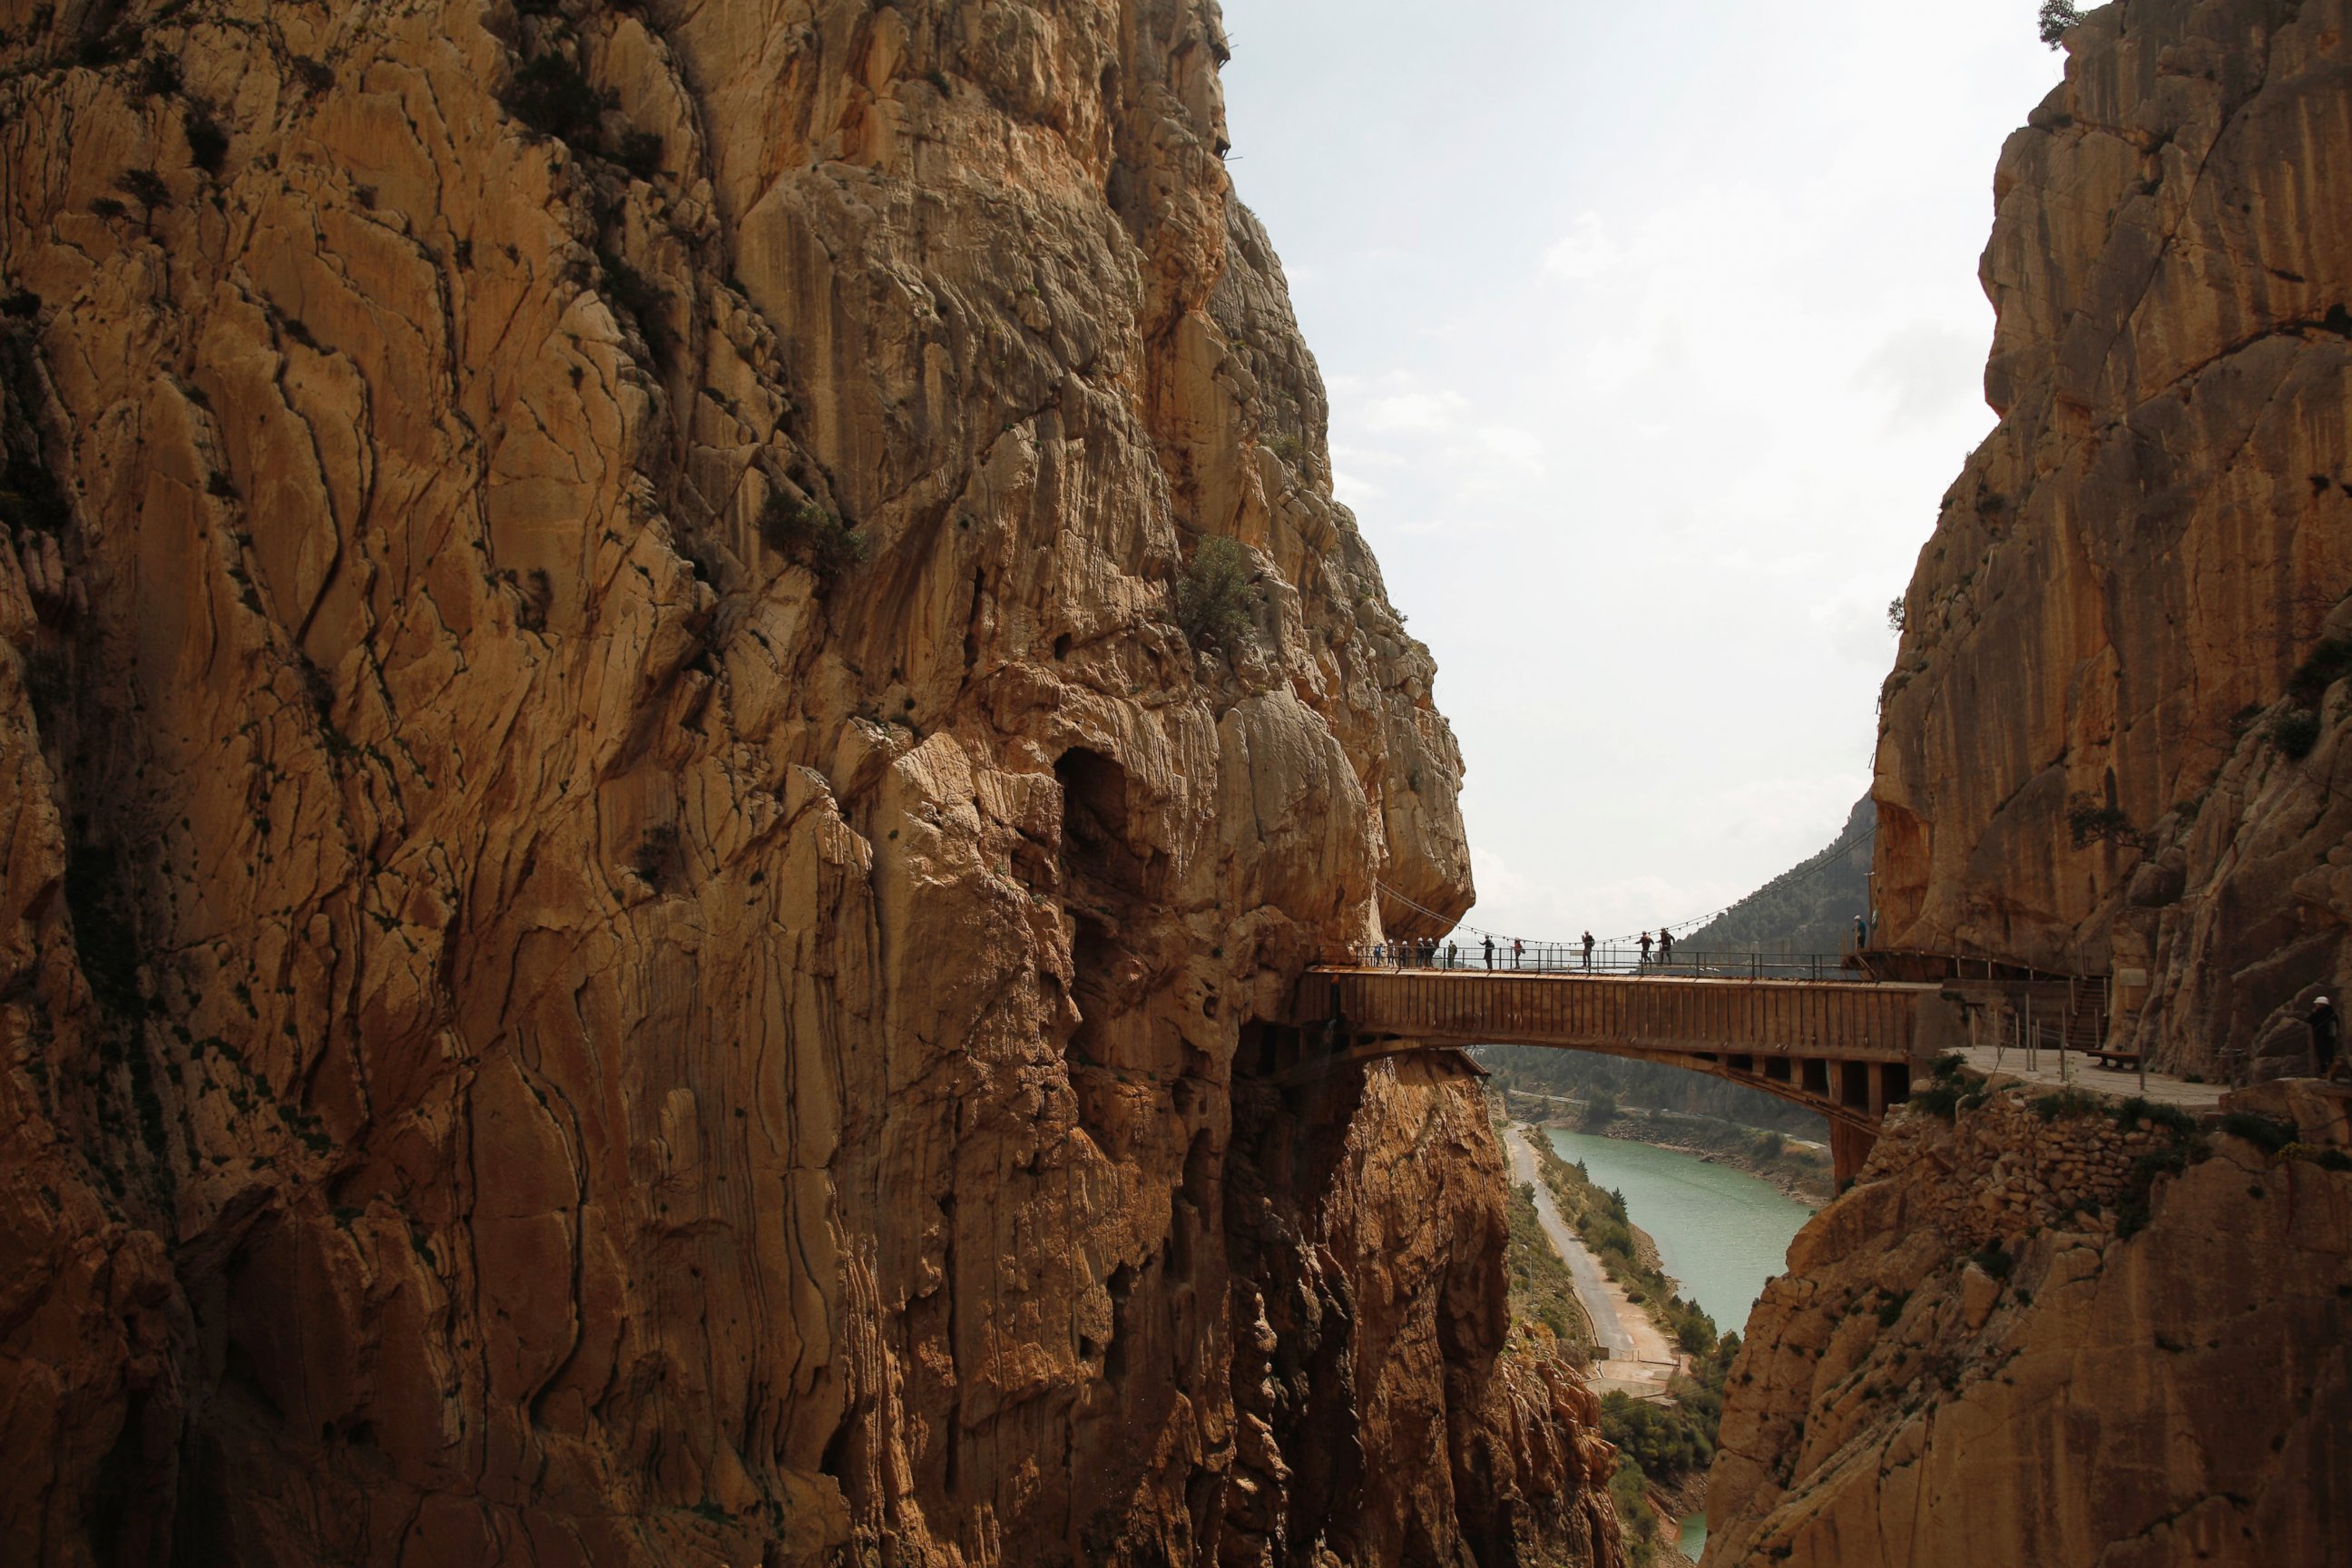 PHOTO: Journalists walk along the new Caminito del Rey (The King's Little Pathway) in El Chorro-Alora, near Malaga, southern Spain March 15, 2015. 